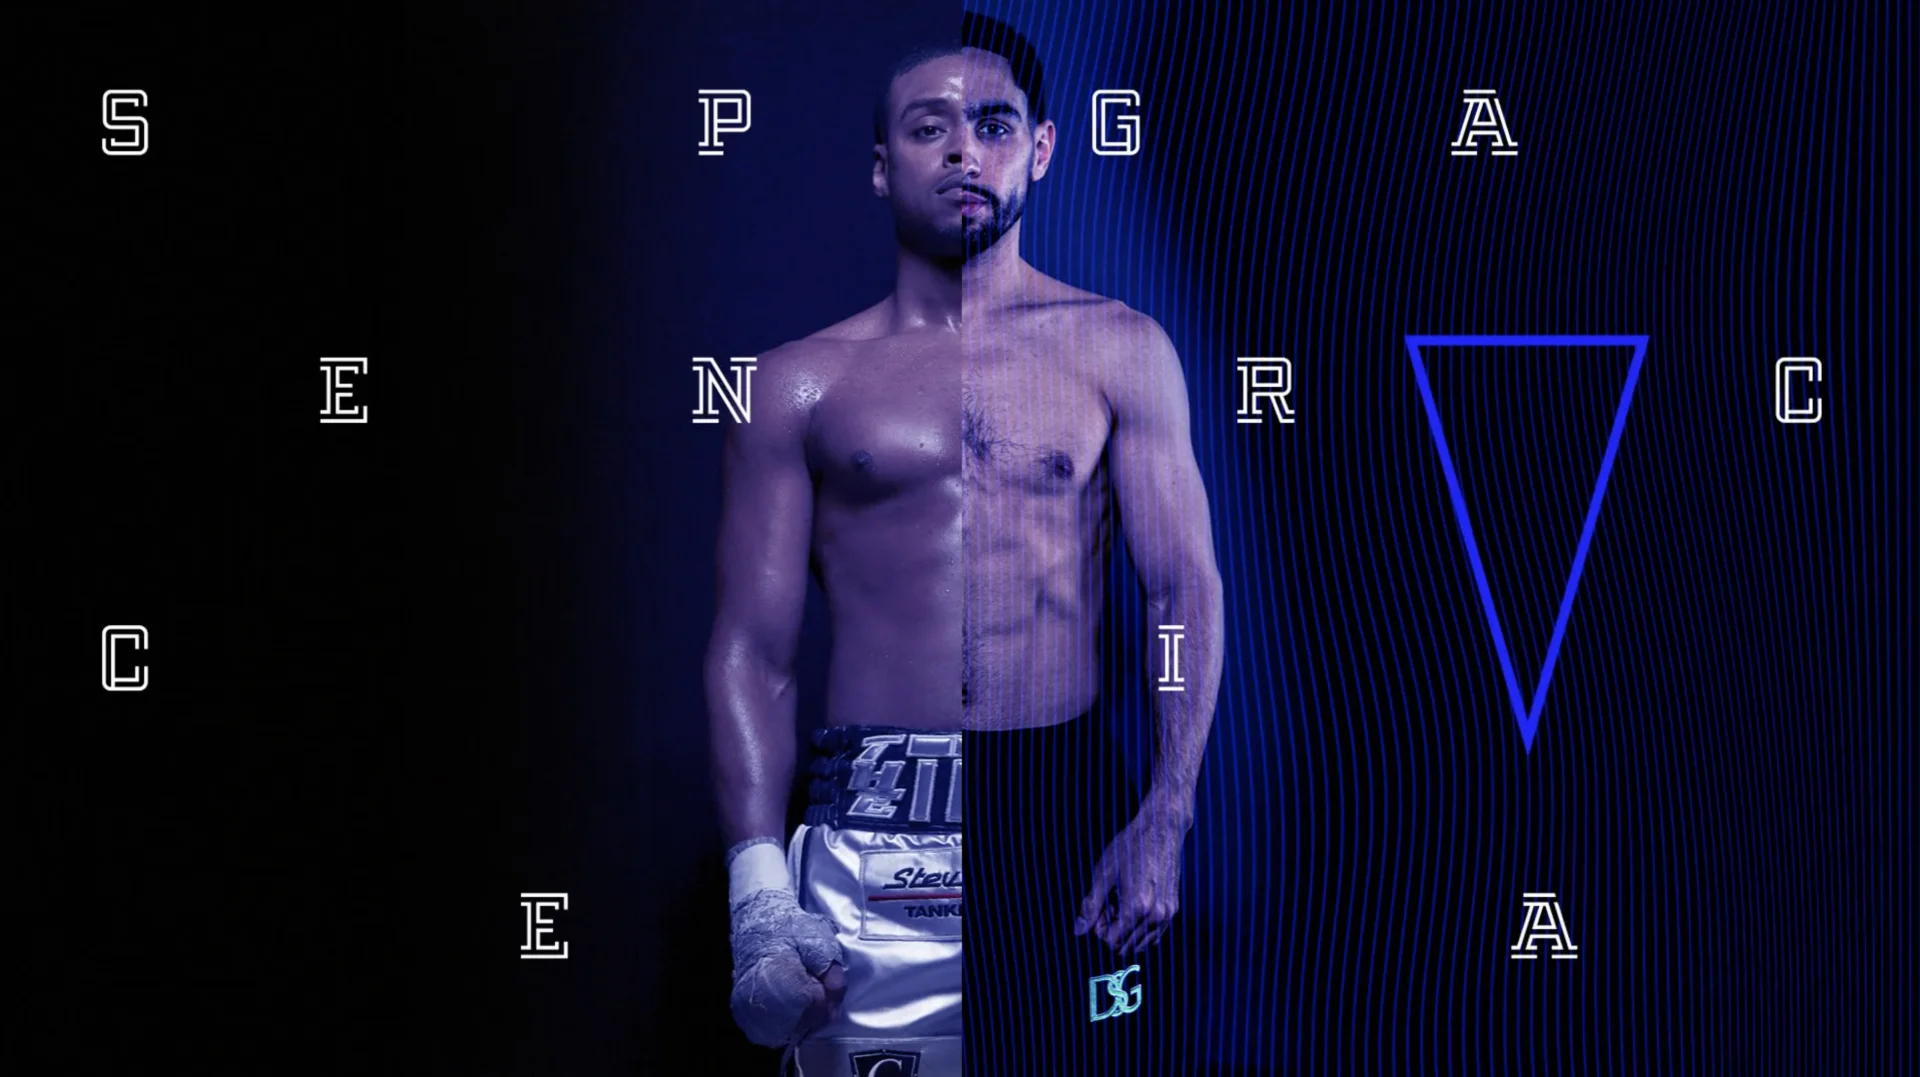 There's nothing like fight night. After months of anticipation, Errol Spence Jr. and Danny Garcia's pay-per-view event delivered on the hype. It was awesome to work on this promo for the major boxing match with our partners at Fox Sports.